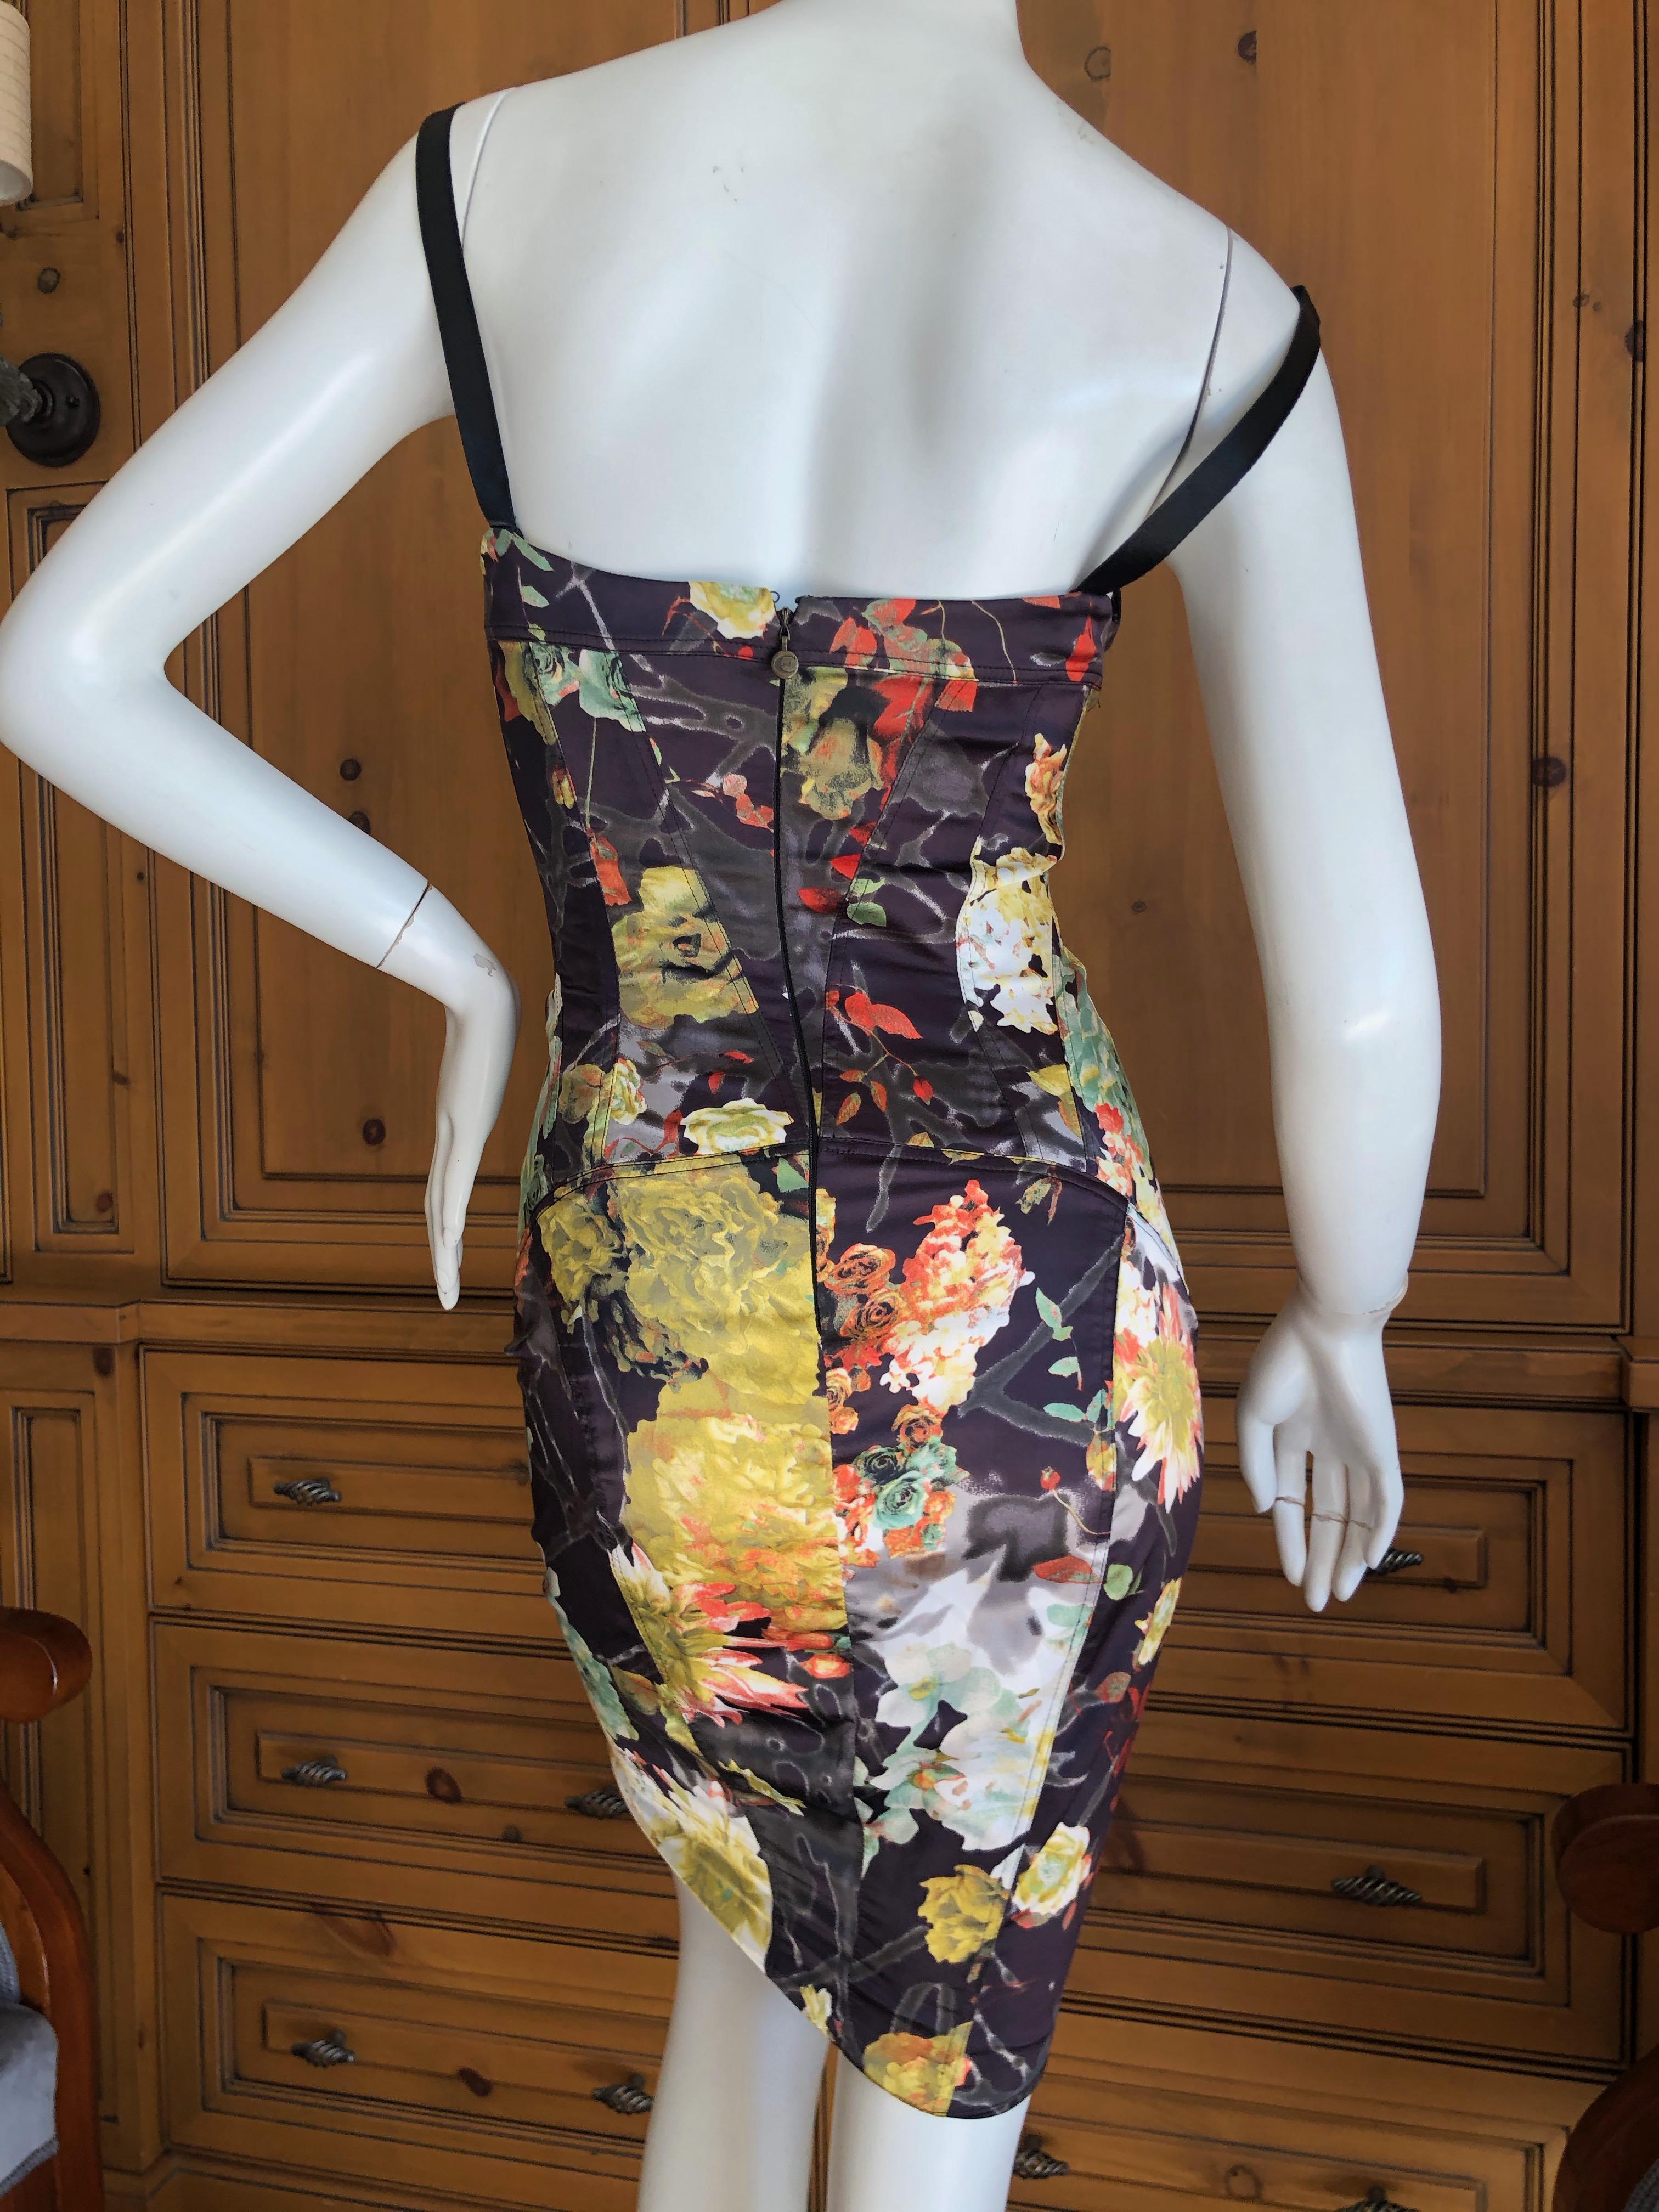 Roberto Cavalli for Just Cavalli Floral Dress with Corset Like Details. 
This is so pretty, with a lot of stretch.
Size 40
Bust 35